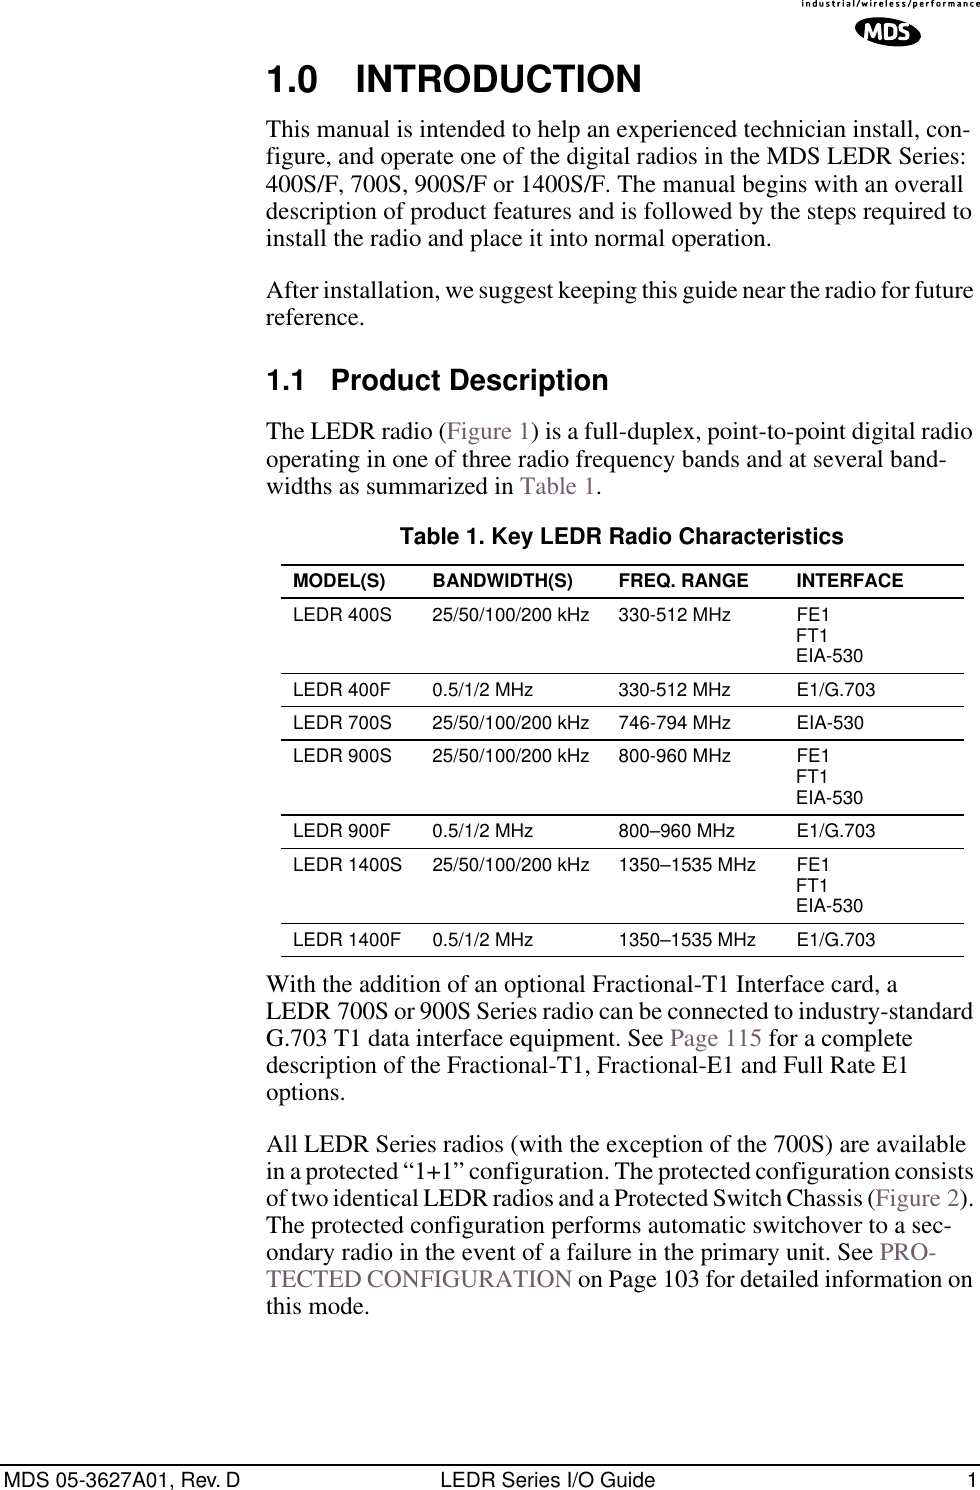  MDS 05-3627A01, Rev. D LEDR Series I/O Guide 1 1.0 INTRODUCTION This manual is intended to help an experienced technician install, con-figure, and operate one of the digital radios in the MDS LEDR Series: 400S/F, 700S, 900S/F or 1400S/F. The manual begins with an overall description of product features and is followed by the steps required to install the radio and place it into normal operation.After installation, we suggest keeping this guide near the radio for future reference. 1.1 Product Description The LEDR radio (Figure 1) is a full-duplex, point-to-point digital radio operating in one of three radio frequency bands and at several band-widths as summarized in Table 1.With the addition of an optional Fractional-T1 Interface card, a LEDR 700S or 900S Series radio can be connected to industry-standard G.703 T1 data interface equipment. See Page 115 for a complete description of the Fractional-T1, Fractional-E1 and Full Rate E1 options.All LEDR Series radios (with the exception of the 700S) are available in a protected “1+1” configuration. The protected configuration consists of two identical LEDR radios and a Protected Switch Chassis (Figure 2). The protected configuration performs automatic switchover to a sec-ondary radio in the event of a failure in the primary unit. See PRO-TECTED CONFIGURATION on Page 103 for detailed information on this mode. Table 1. Key LEDR Radio Characteristics MODEL(S) BANDWIDTH(S) FREQ. RANGE INTERFACE LEDR 400S 25/50/100/200 kHz 330-512 MHz FE1FT1EIA-530LEDR 400F 0.5/1/2 MHz 330-512 MHz E1/G.703LEDR 700S 25/50/100/200 kHz 746-794 MHz EIA-530LEDR 900S 25/50/100/200 kHz 800-960 MHz FE1FT1EIA-530LEDR 900F 0.5/1/2 MHz 800–960 MHz E1/G.703LEDR 1400S 25/50/100/200 kHz 1350–1535 MHz FE1FT1EIA-530LEDR 1400F 0.5/1/2 MHz 1350–1535 MHz E1/G.703